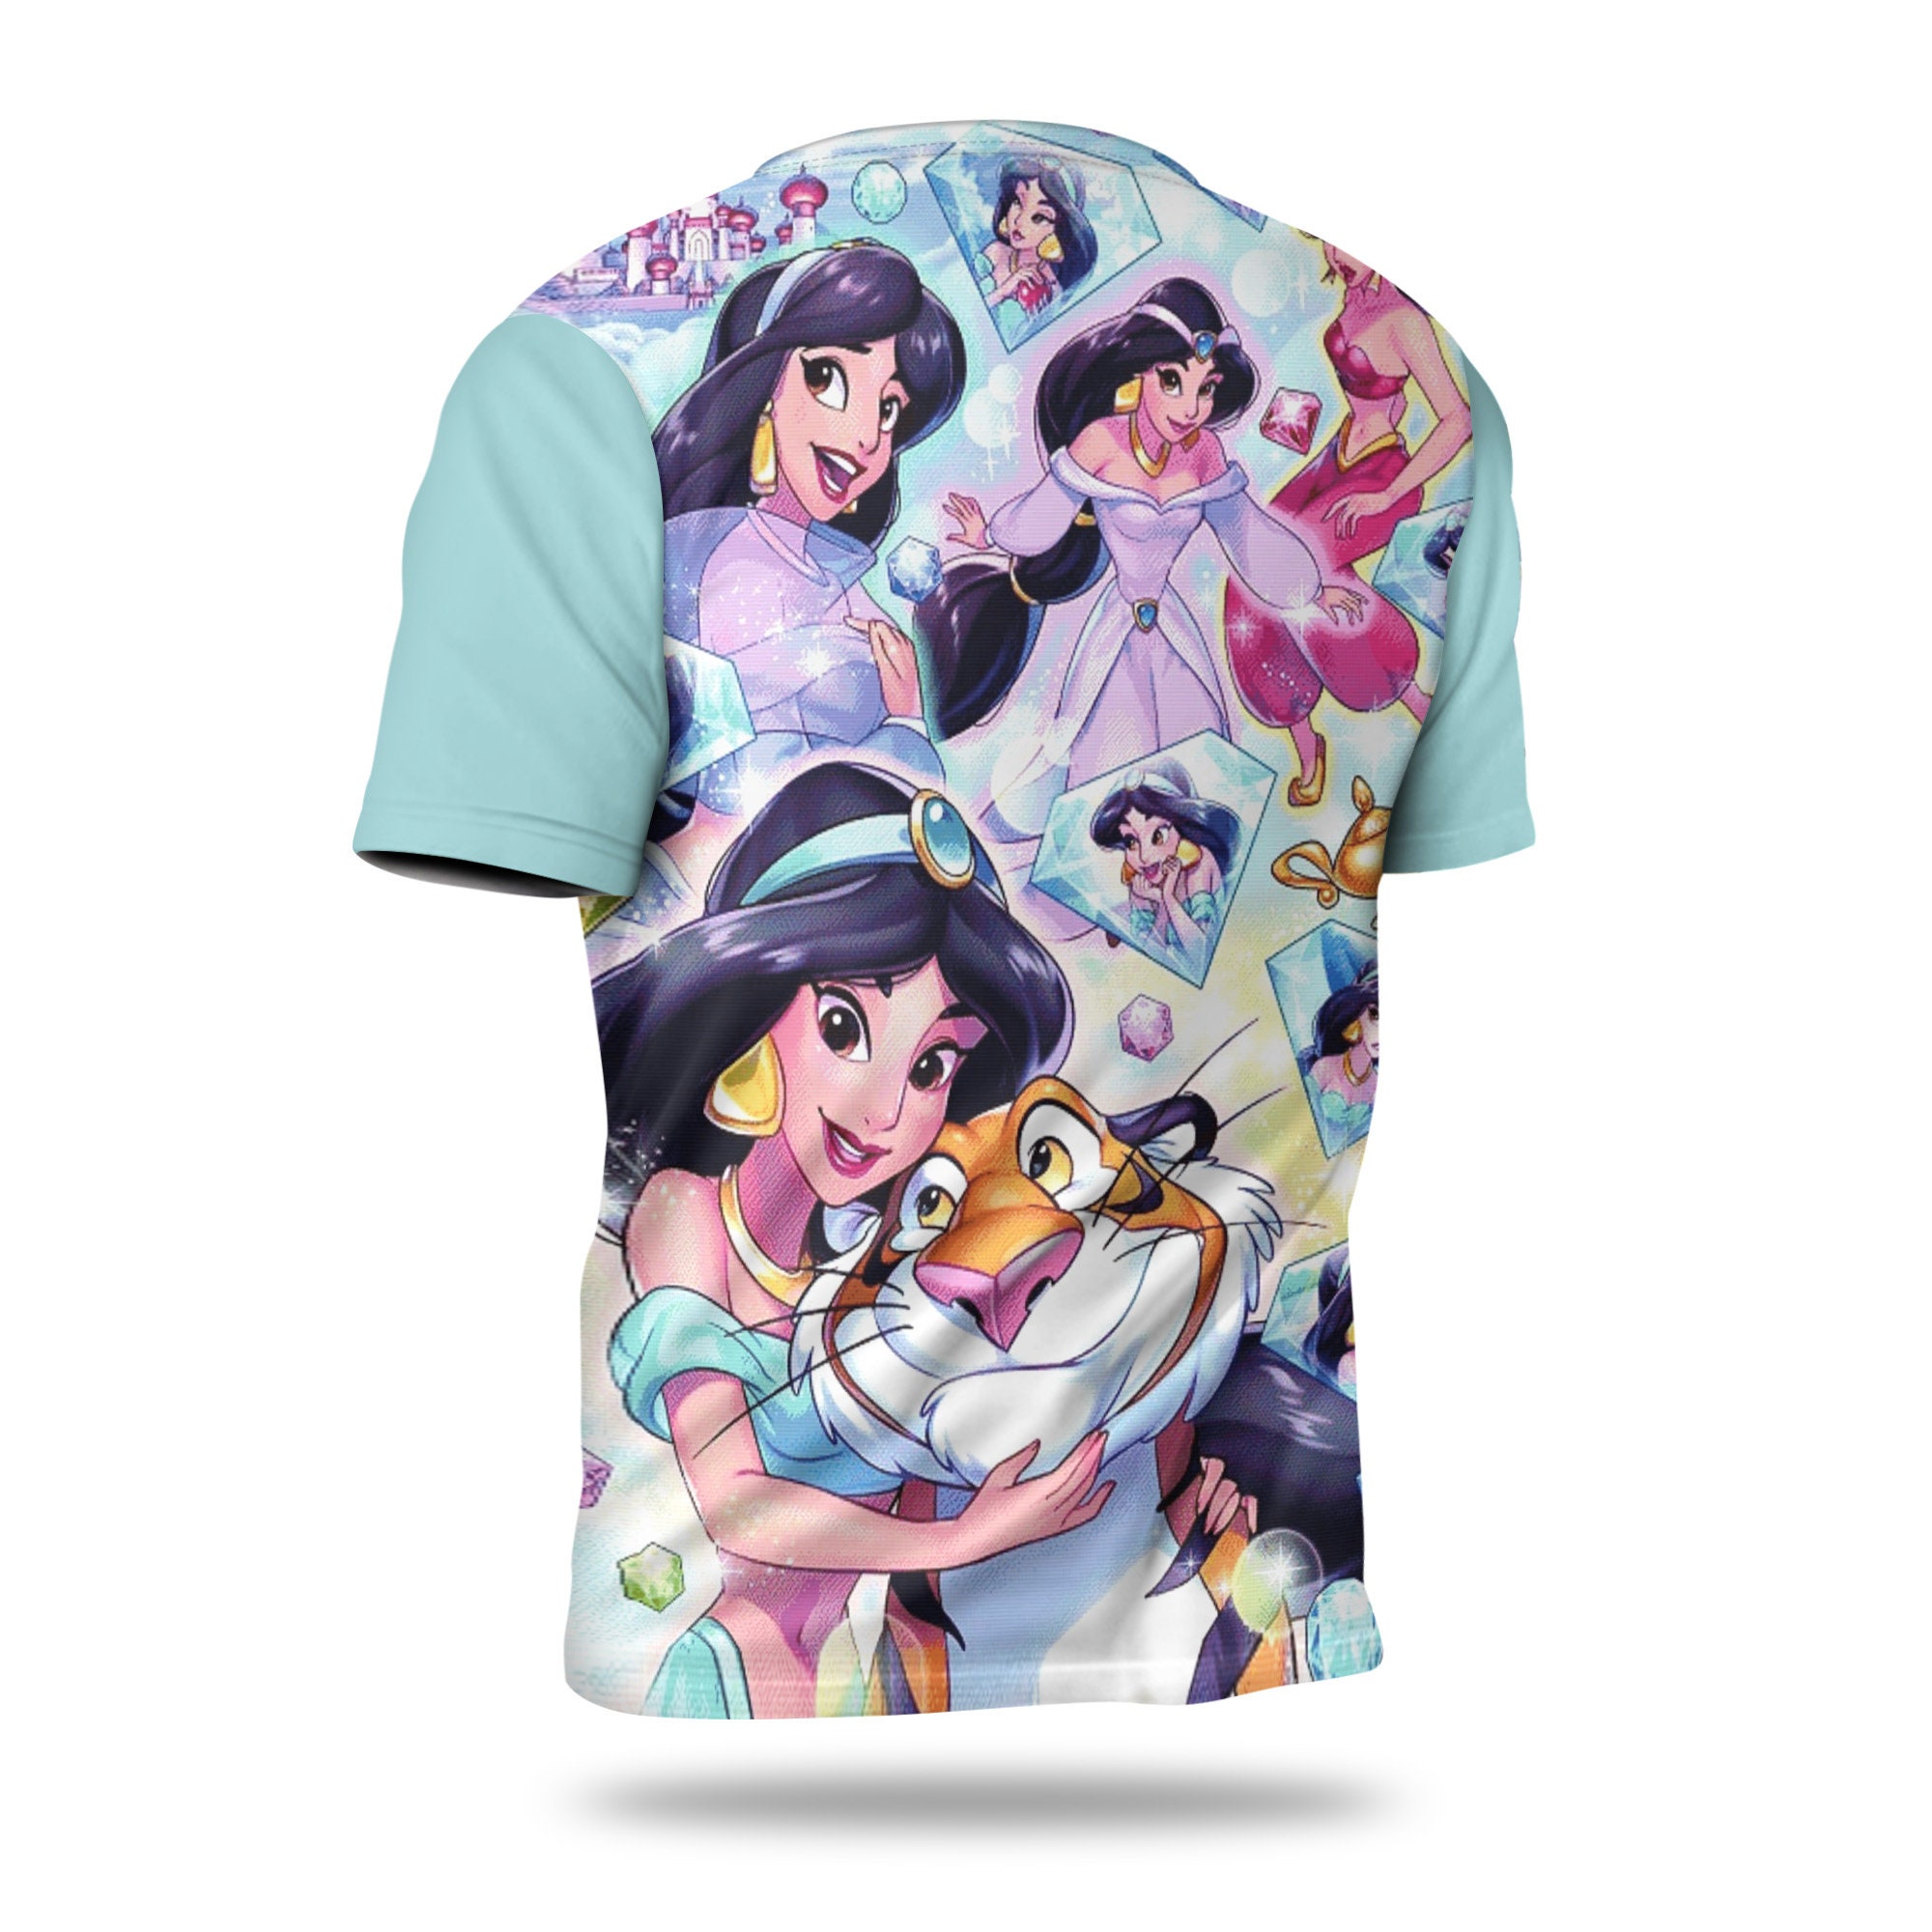 Jasmine & Rajah Clear Button Overalls Patterns Disney Outfits Unisex Casual T-shirts 3D